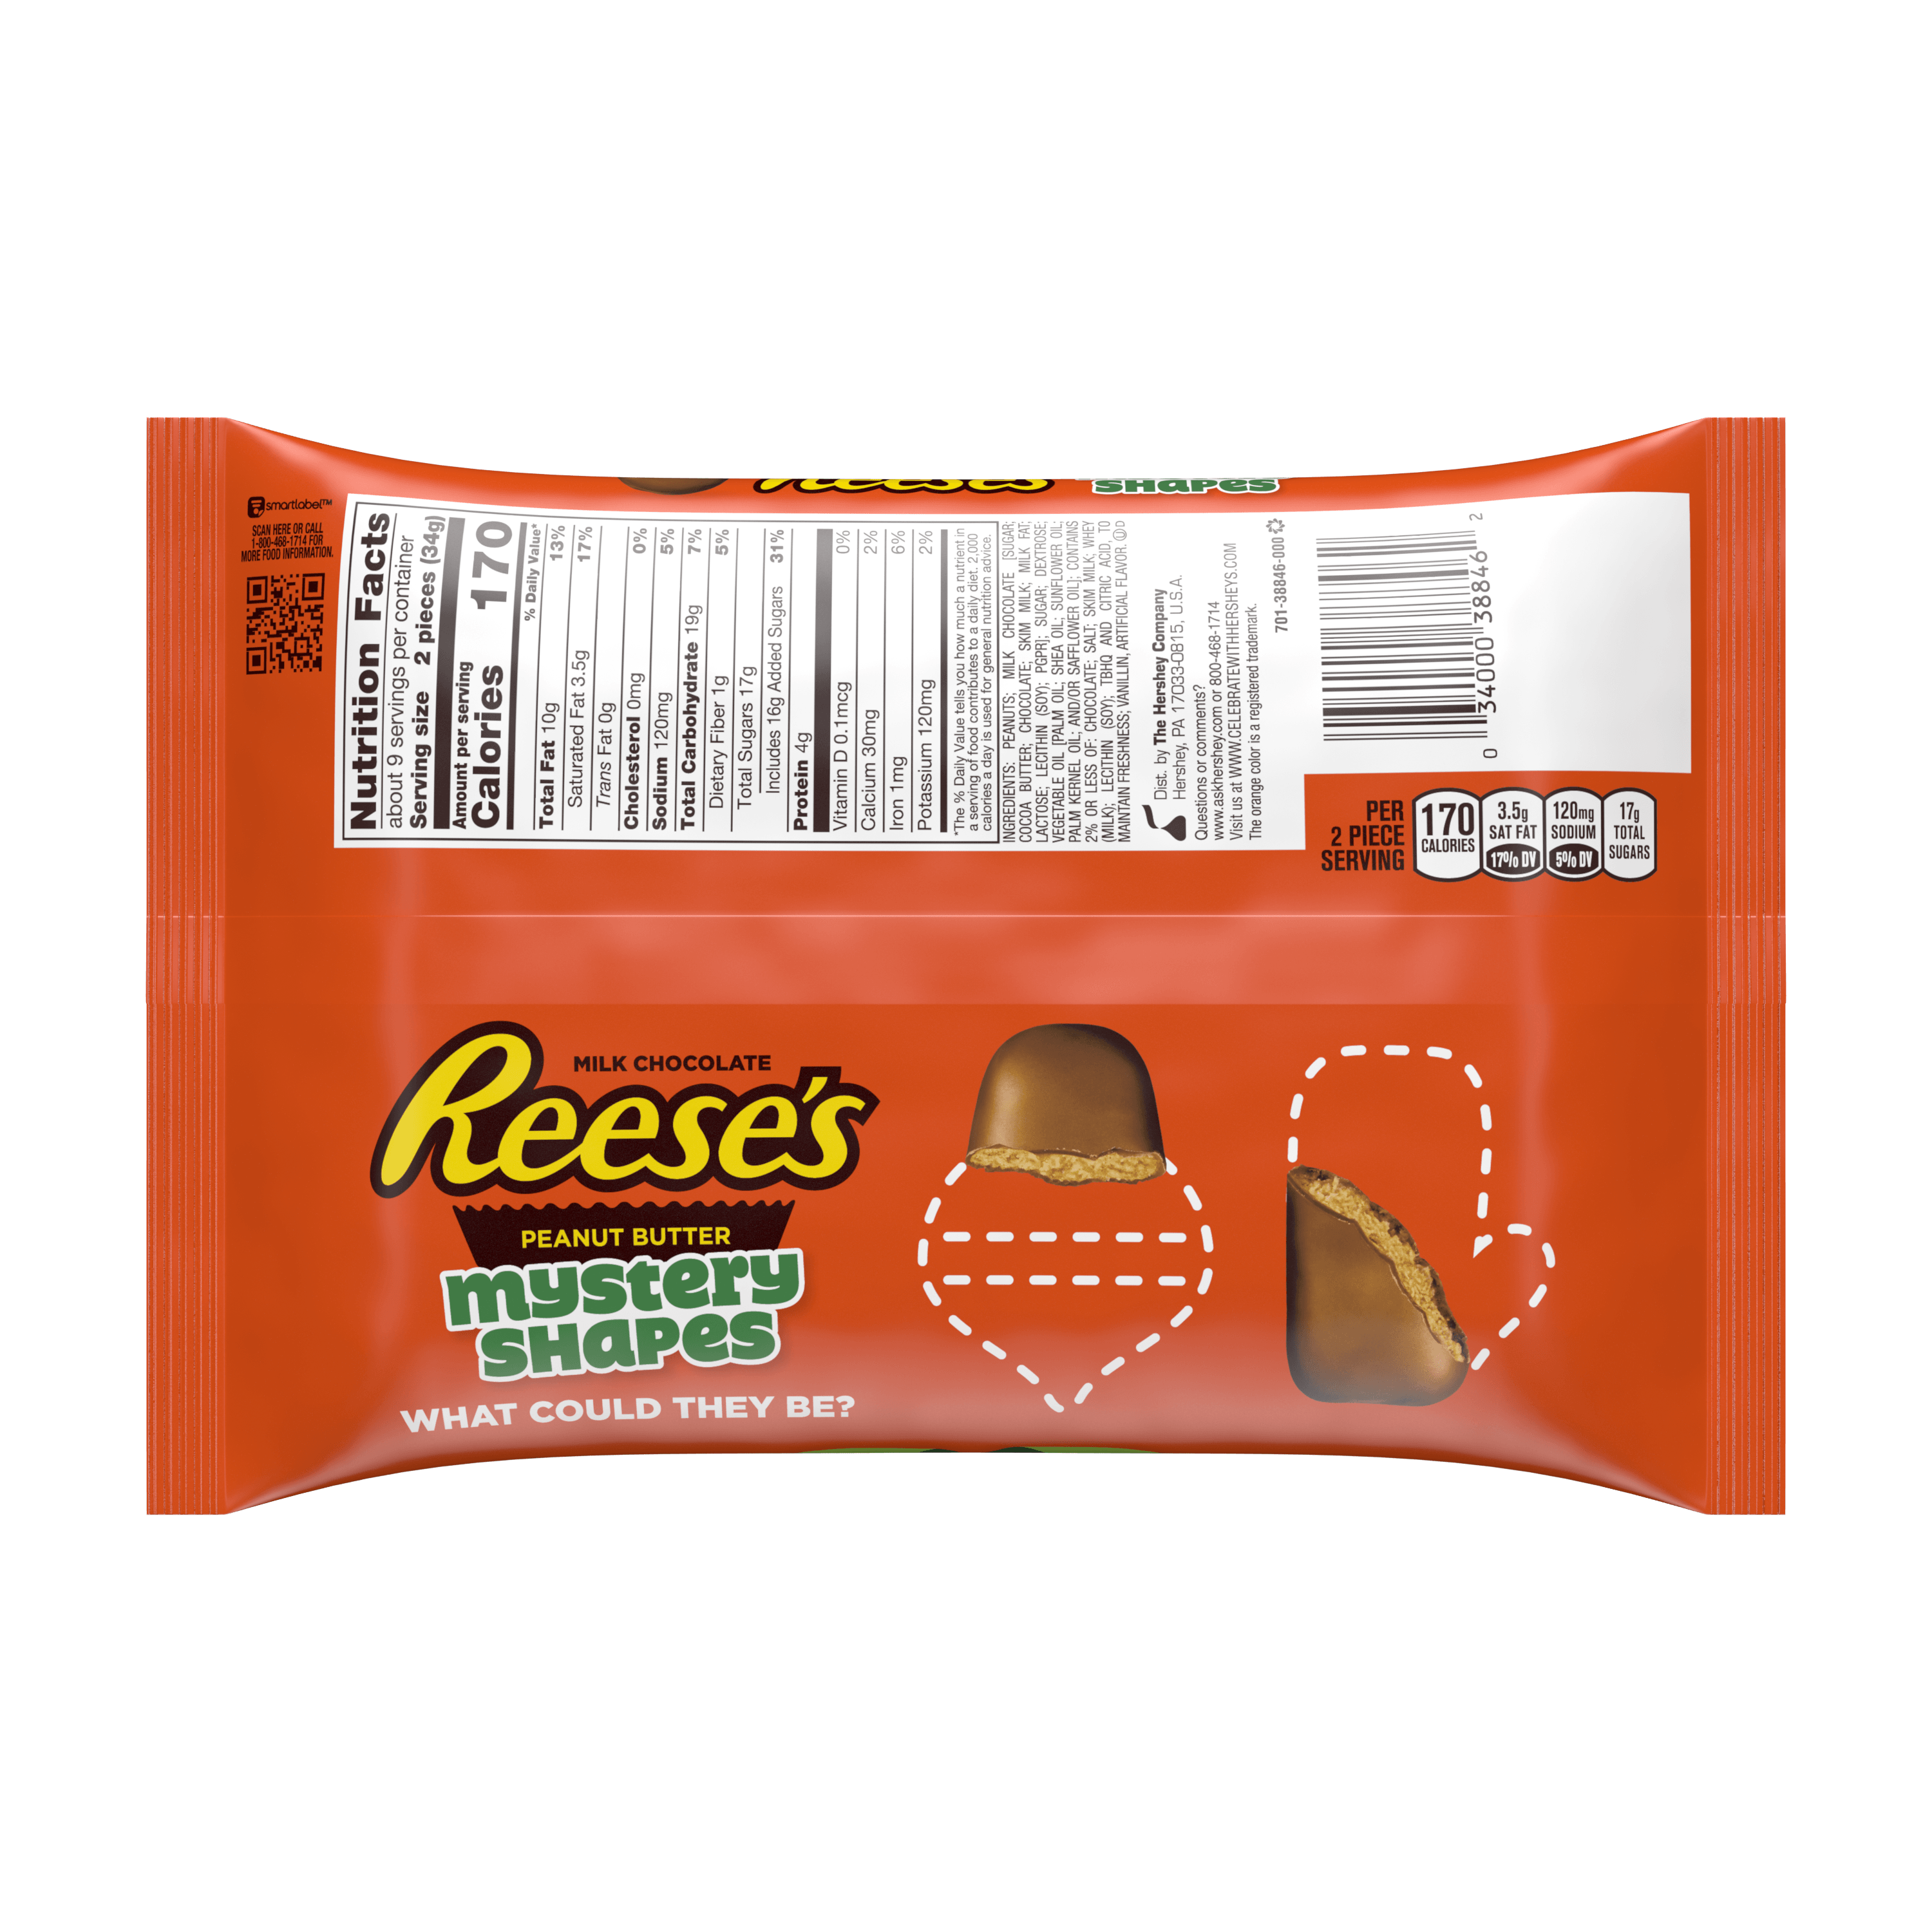 REESES MYSTERY SHAPES - image 5 of 5